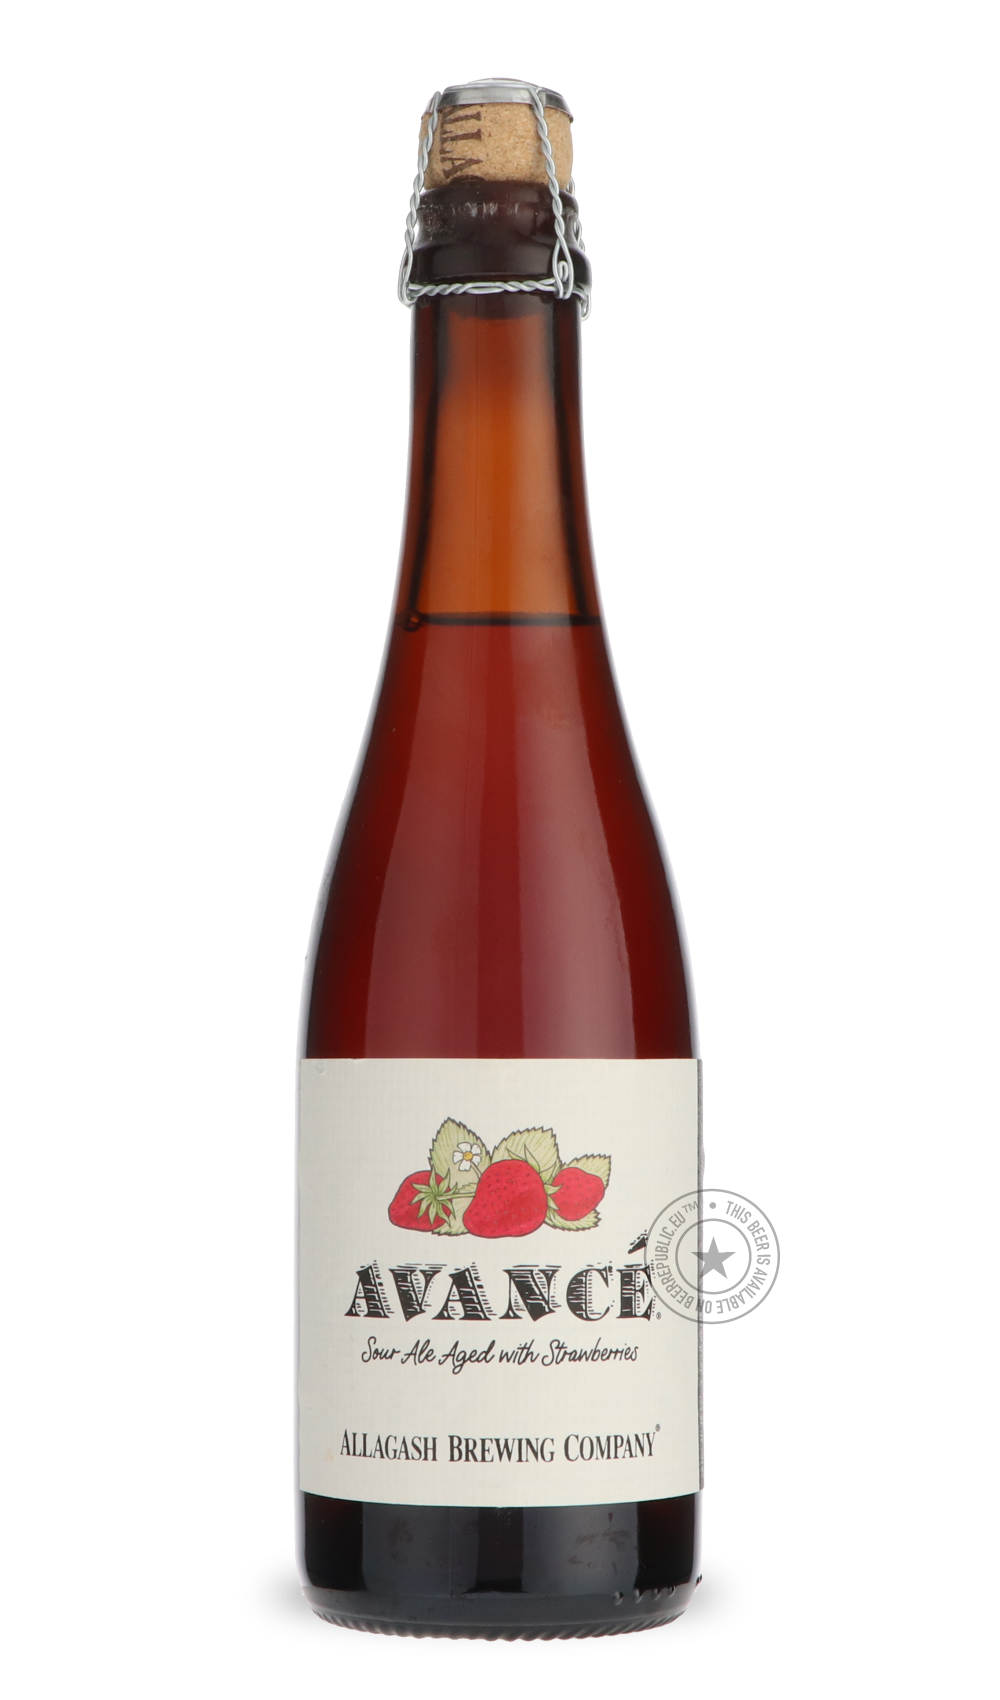 -Allagash- Avancé-Sour / Wild & Fruity- Only @ Beer Republic - The best online beer store for American & Canadian craft beer - Buy beer online from the USA and Canada - Bier online kopen - Amerikaans bier kopen - Craft beer store - Craft beer kopen - Amerikanisch bier kaufen - Bier online kaufen - Acheter biere online - IPA - Stout - Porter - New England IPA - Hazy IPA - Imperial Stout - Barrel Aged - Barrel Aged Imperial Stout - Brown - Dark beer - Blond - Blonde - Pilsner - Lager - Wheat - Weizen - Amber 